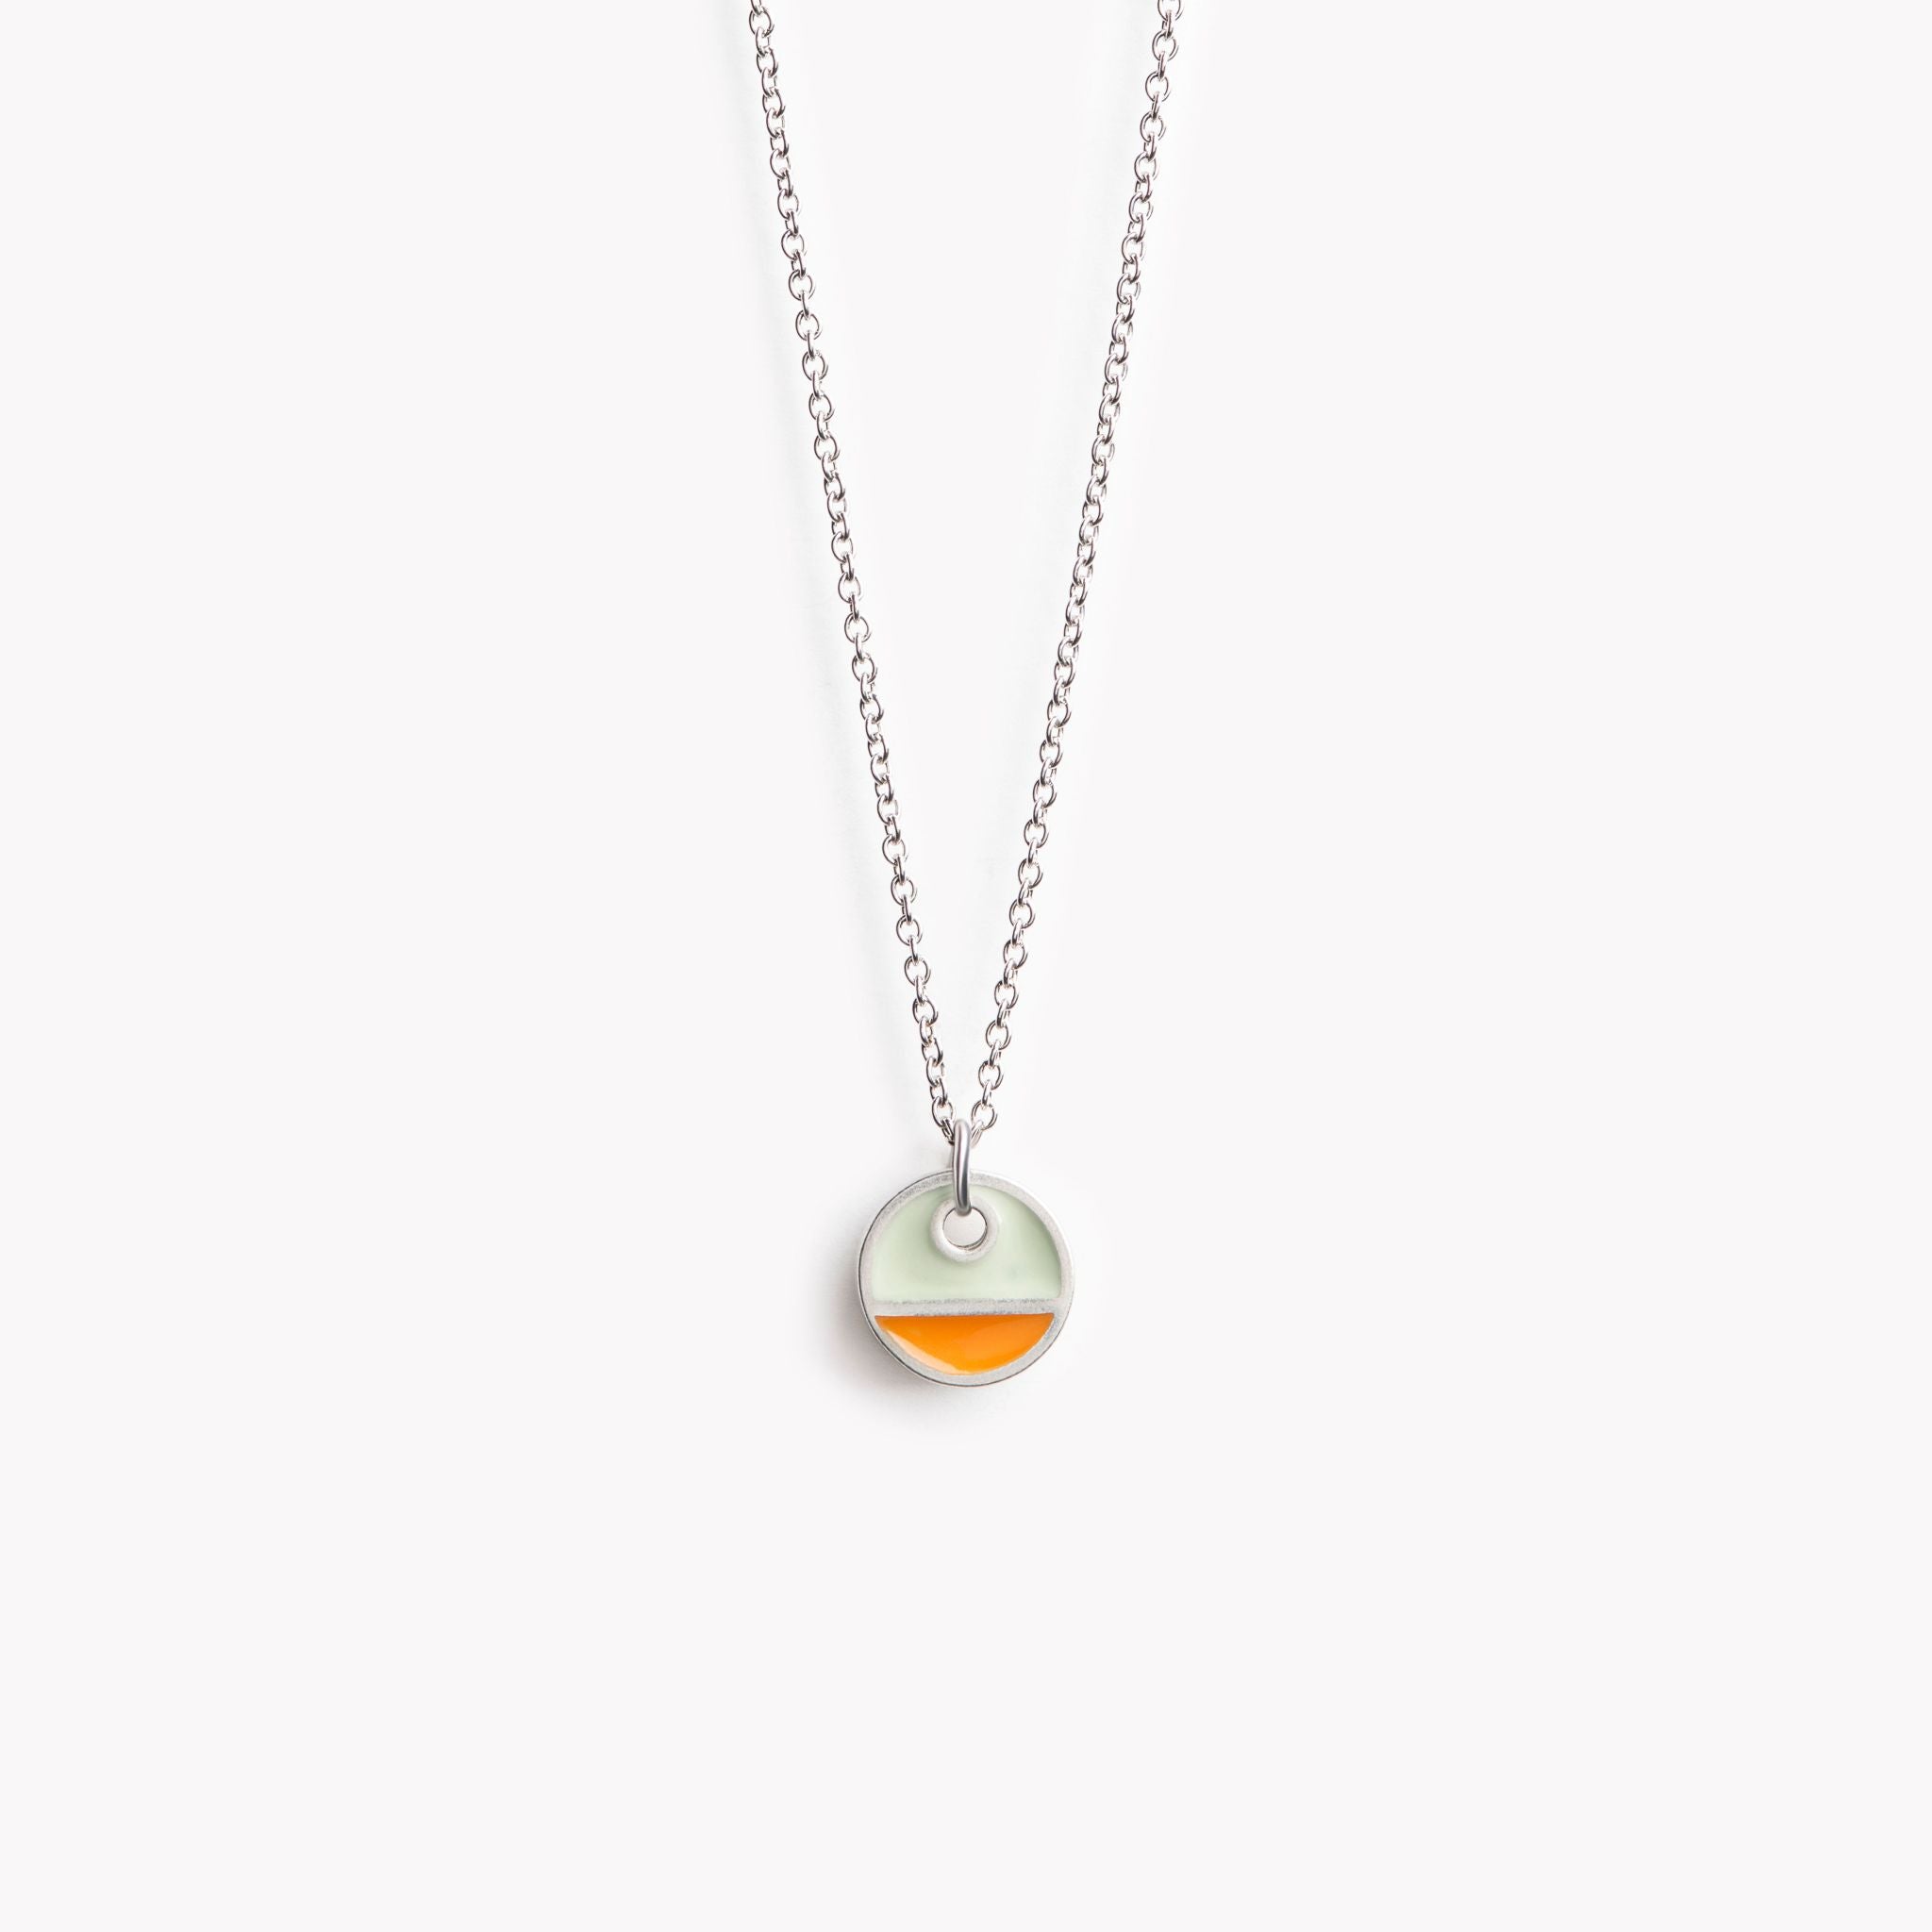 A simple circular pendant necklace with a horizontal division. In orange and grey.